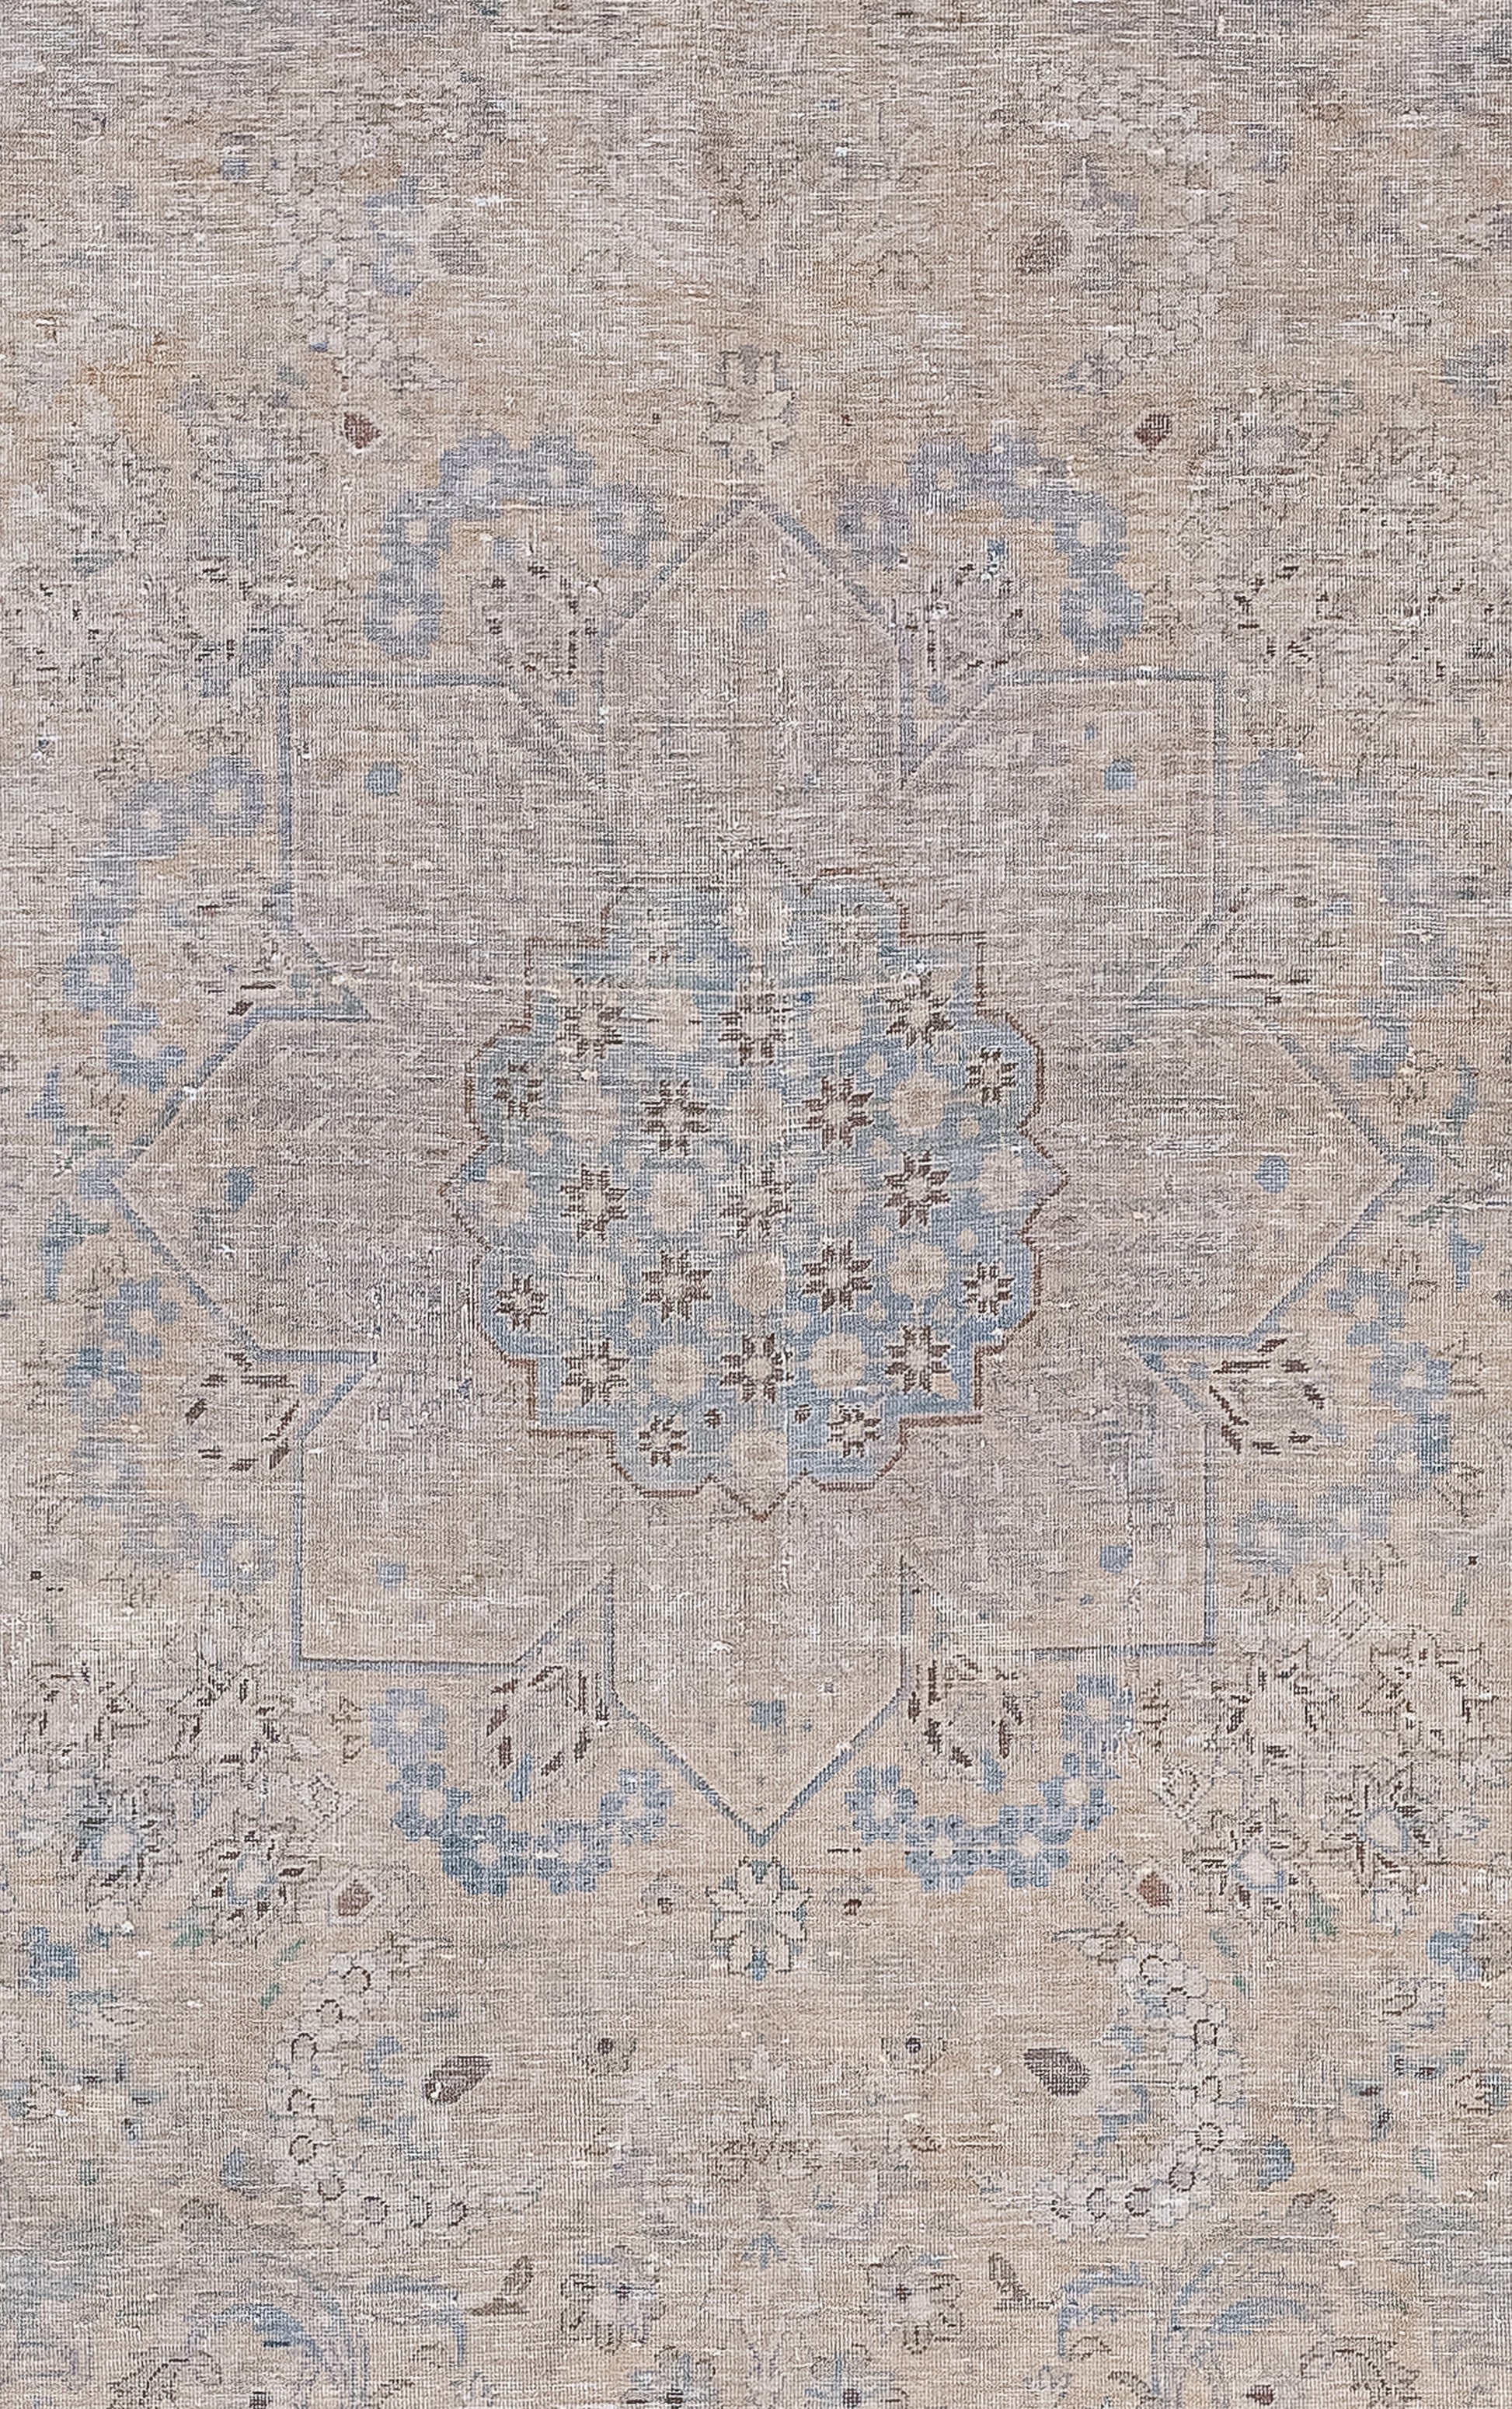 The center of the rug features a large mandala with a nested one filled with tiny flowers at the top.